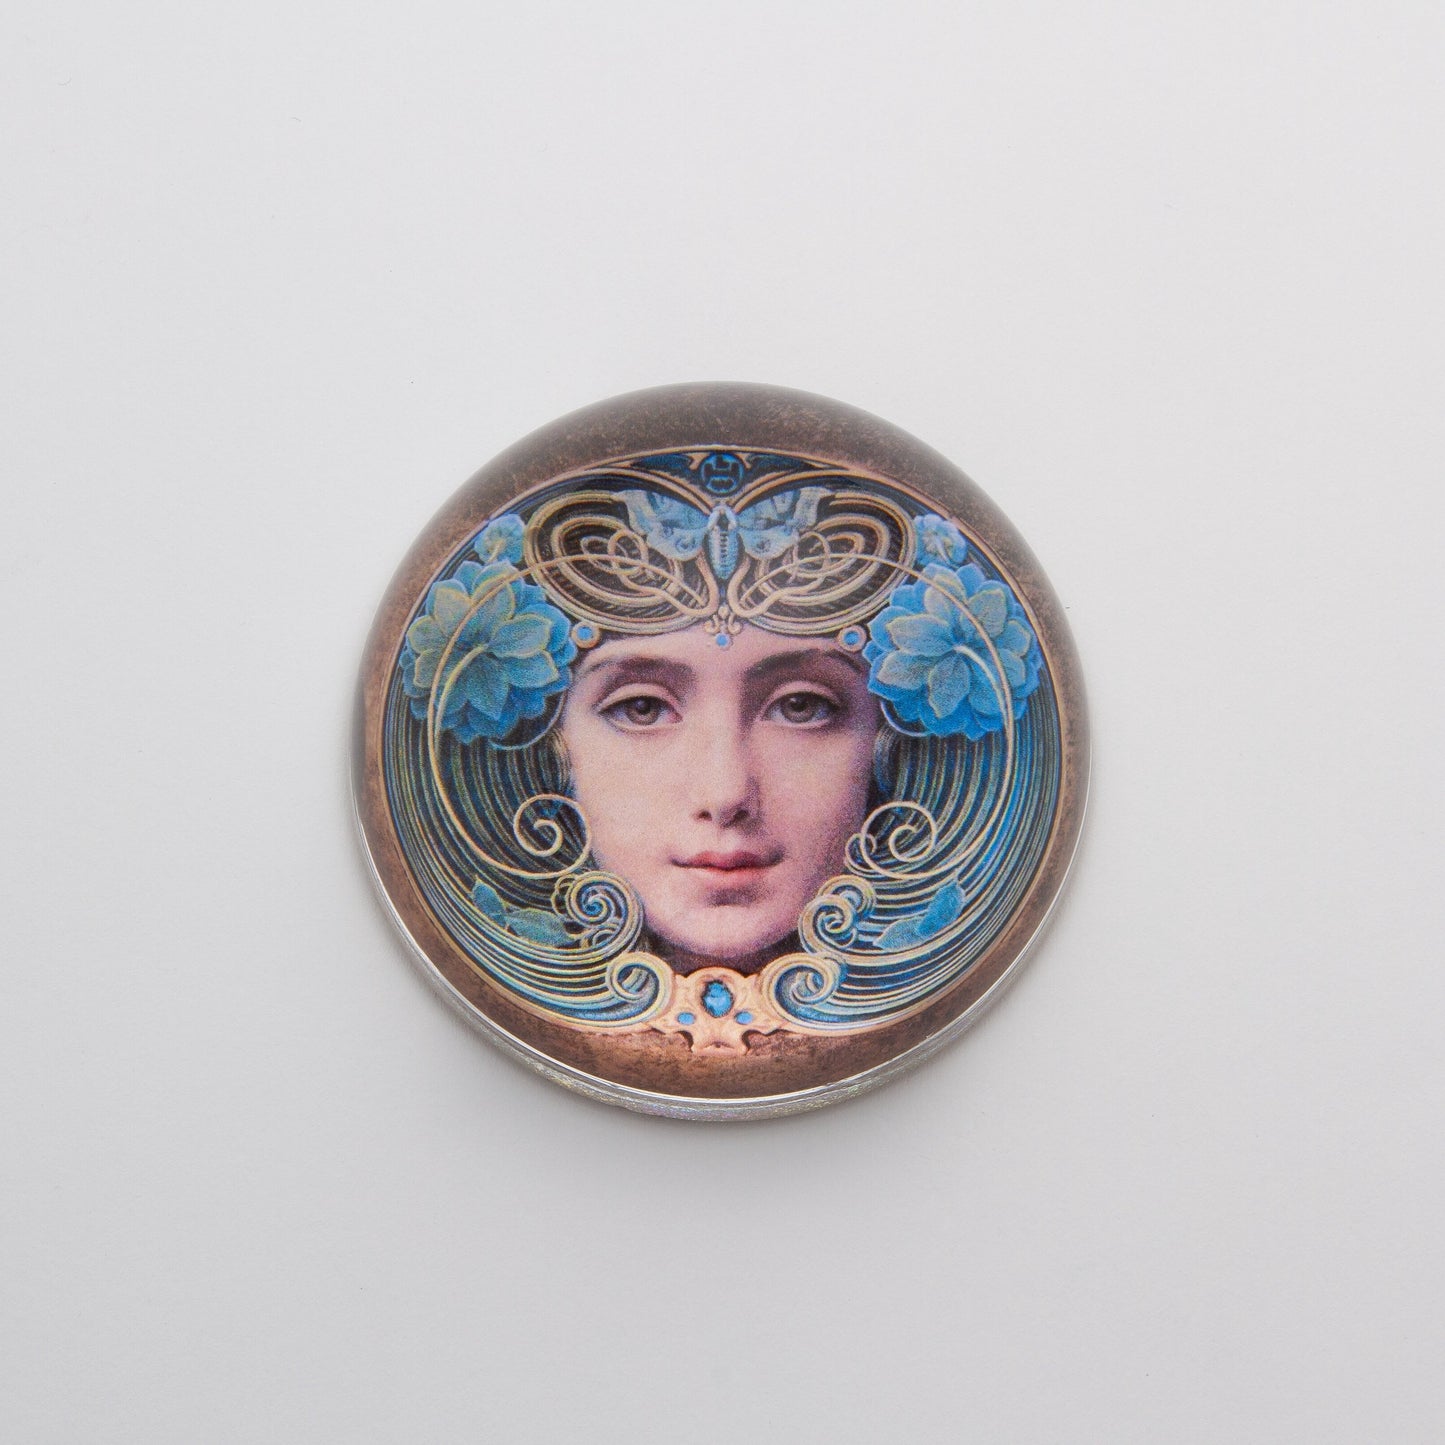 Crystal Domed Paperweight decoupaged with a Art Nouveau Woman's face 